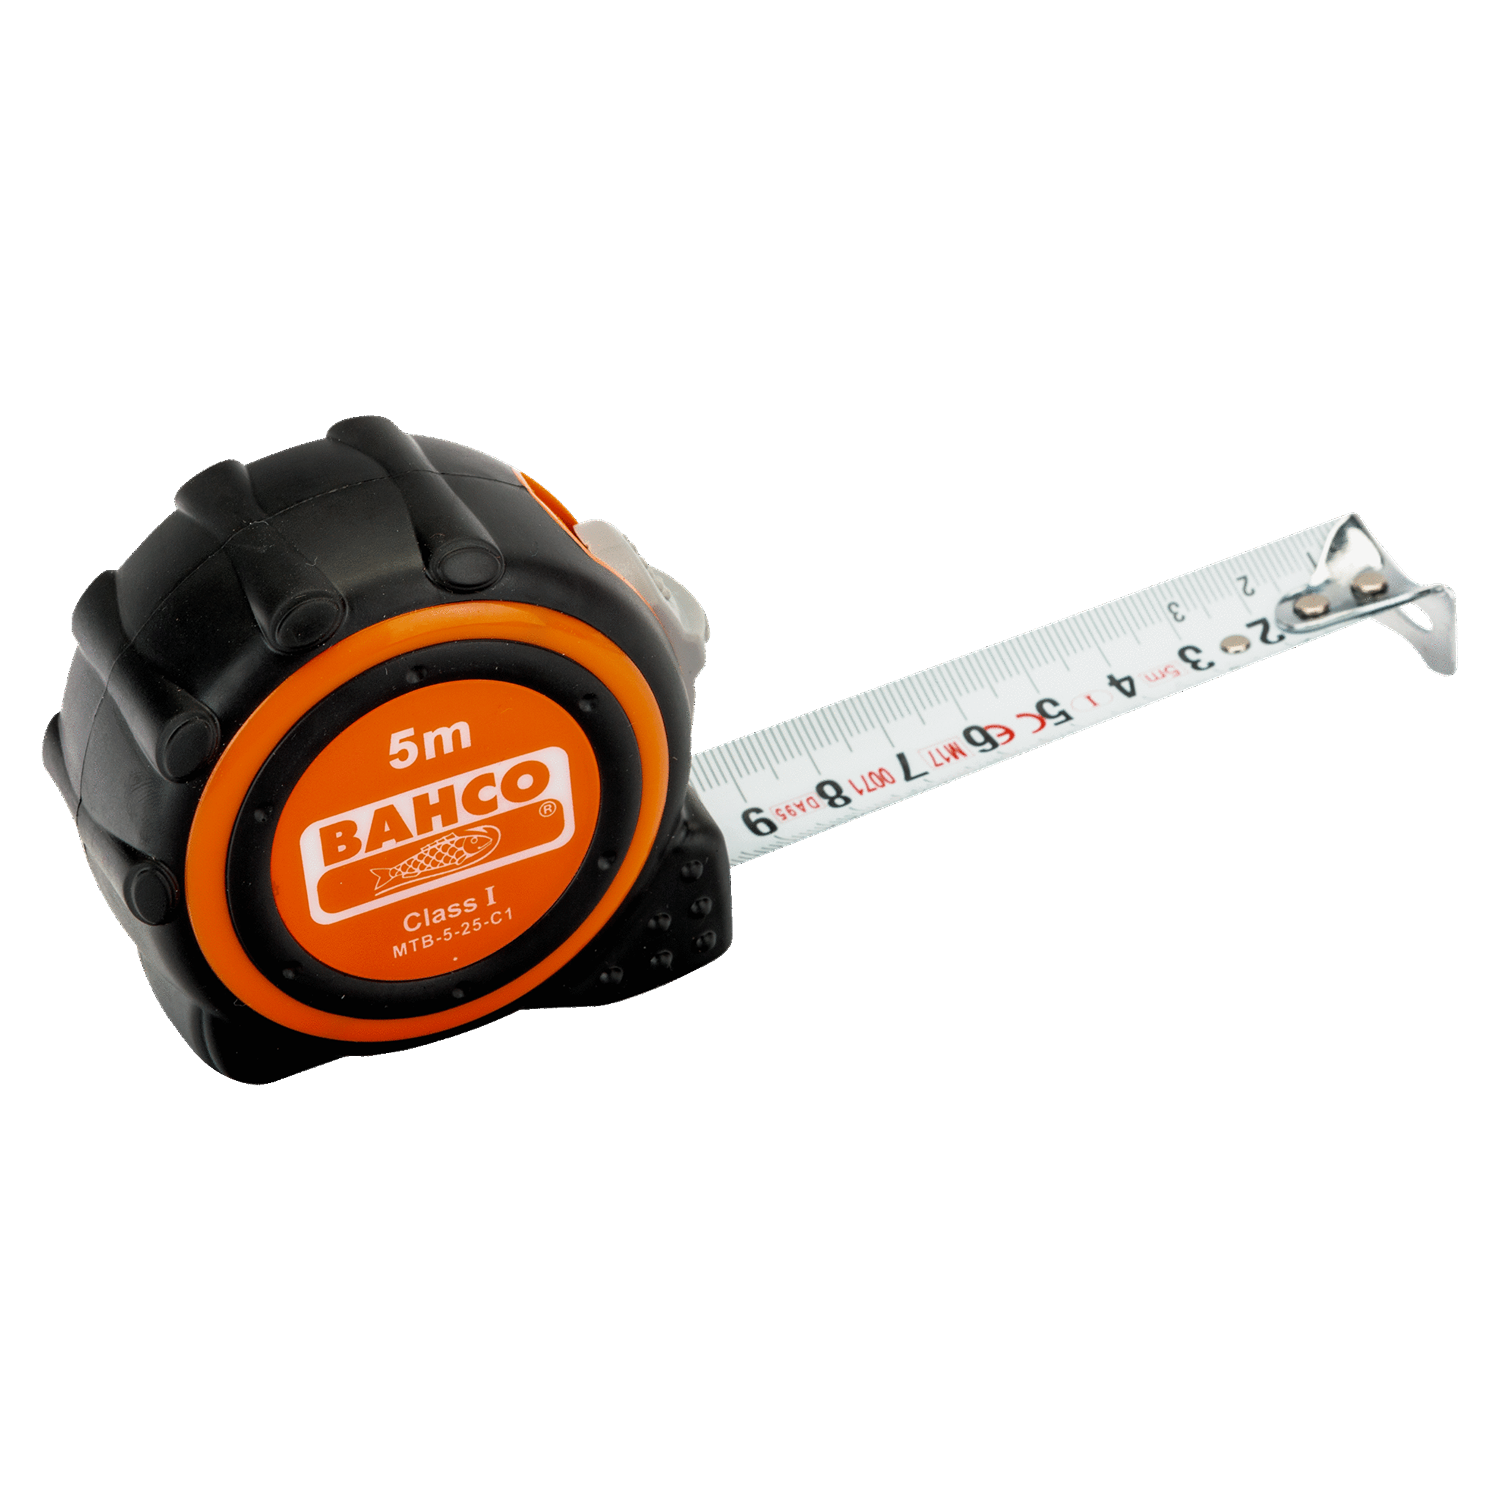 BAHCO MTB_C1 Short Measuring Tape with Rubber Grip Class-I - Premium Measuring Tape from BAHCO - Shop now at Yew Aik.